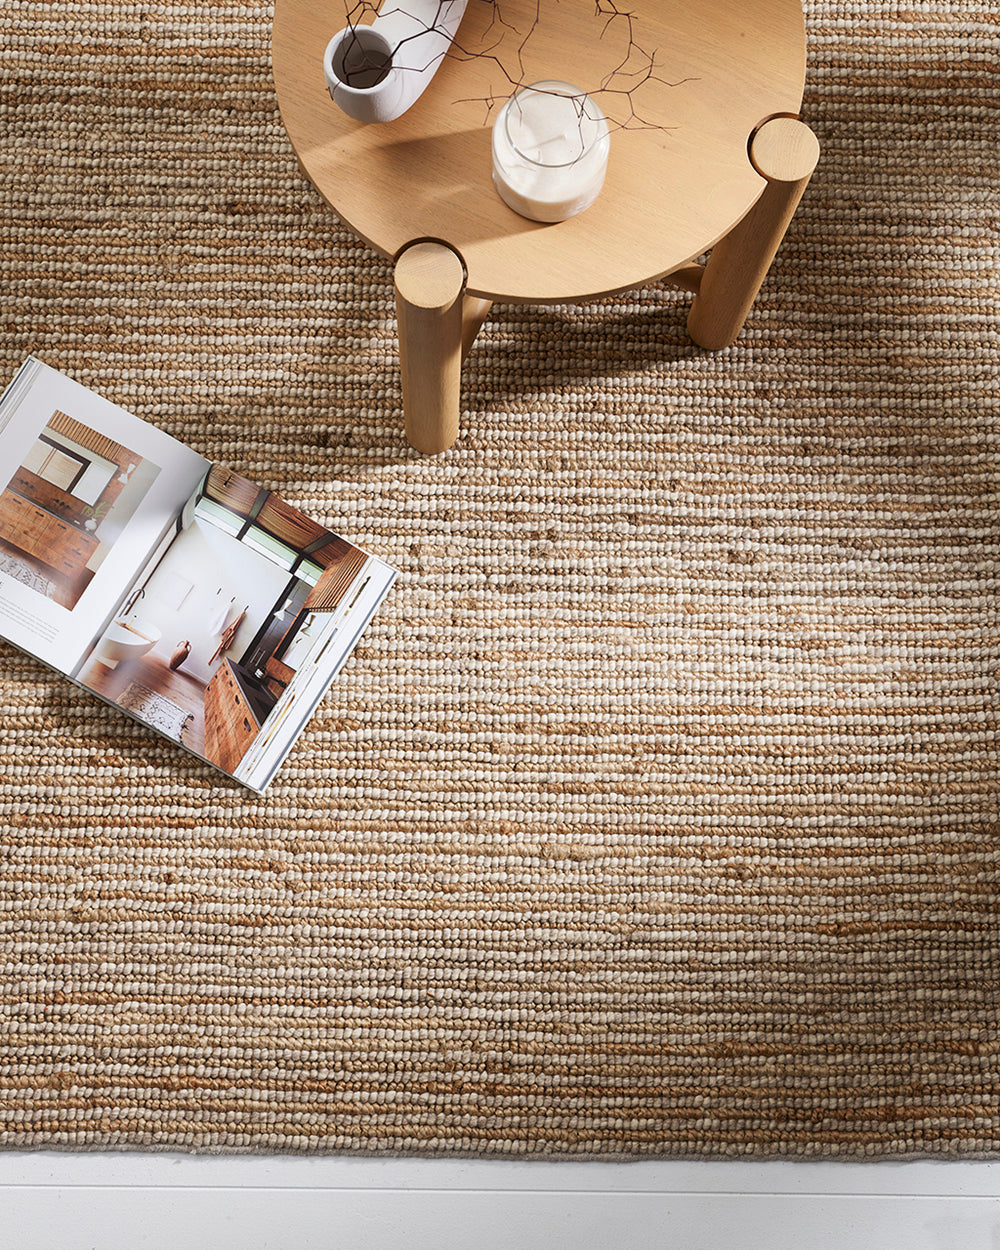 Lima Sand Natural Rug from Baya Furtex Stockist Make Your House A Home, Furniture Store Bendigo. Free Australia Wide Delivery. Mulberi Rugs.